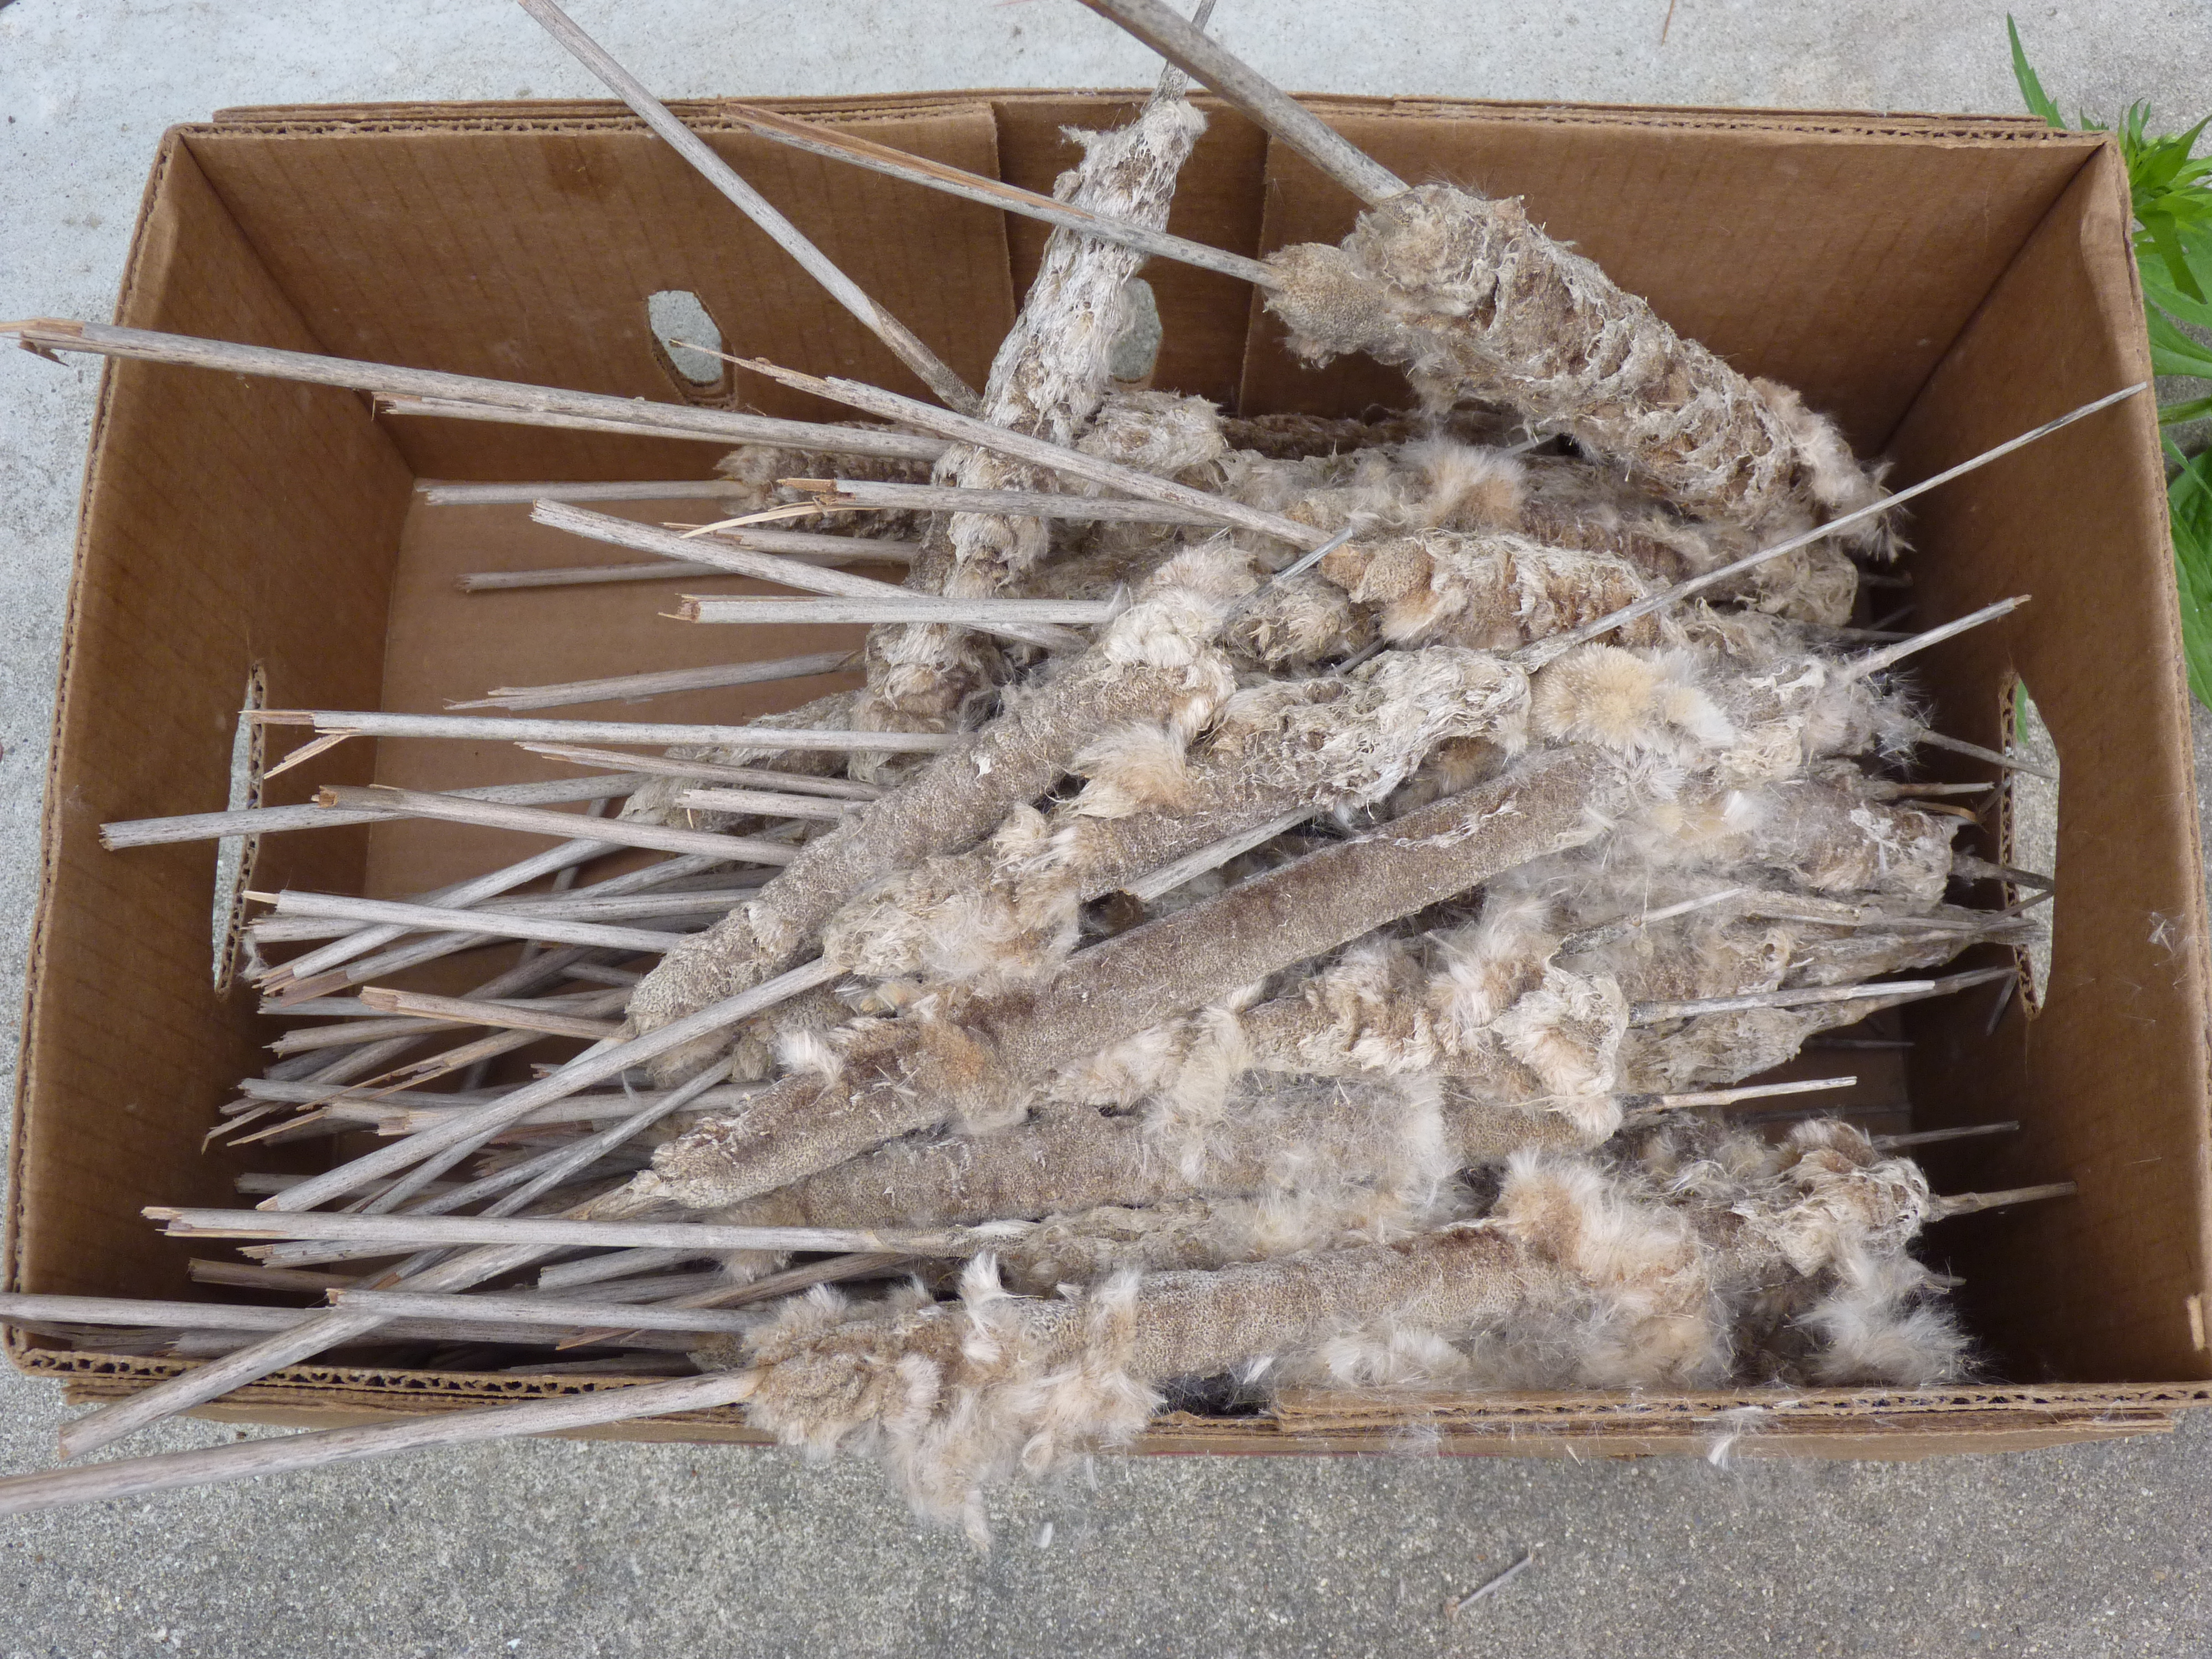 Box of cattail heads, collected in spring along the roadside!